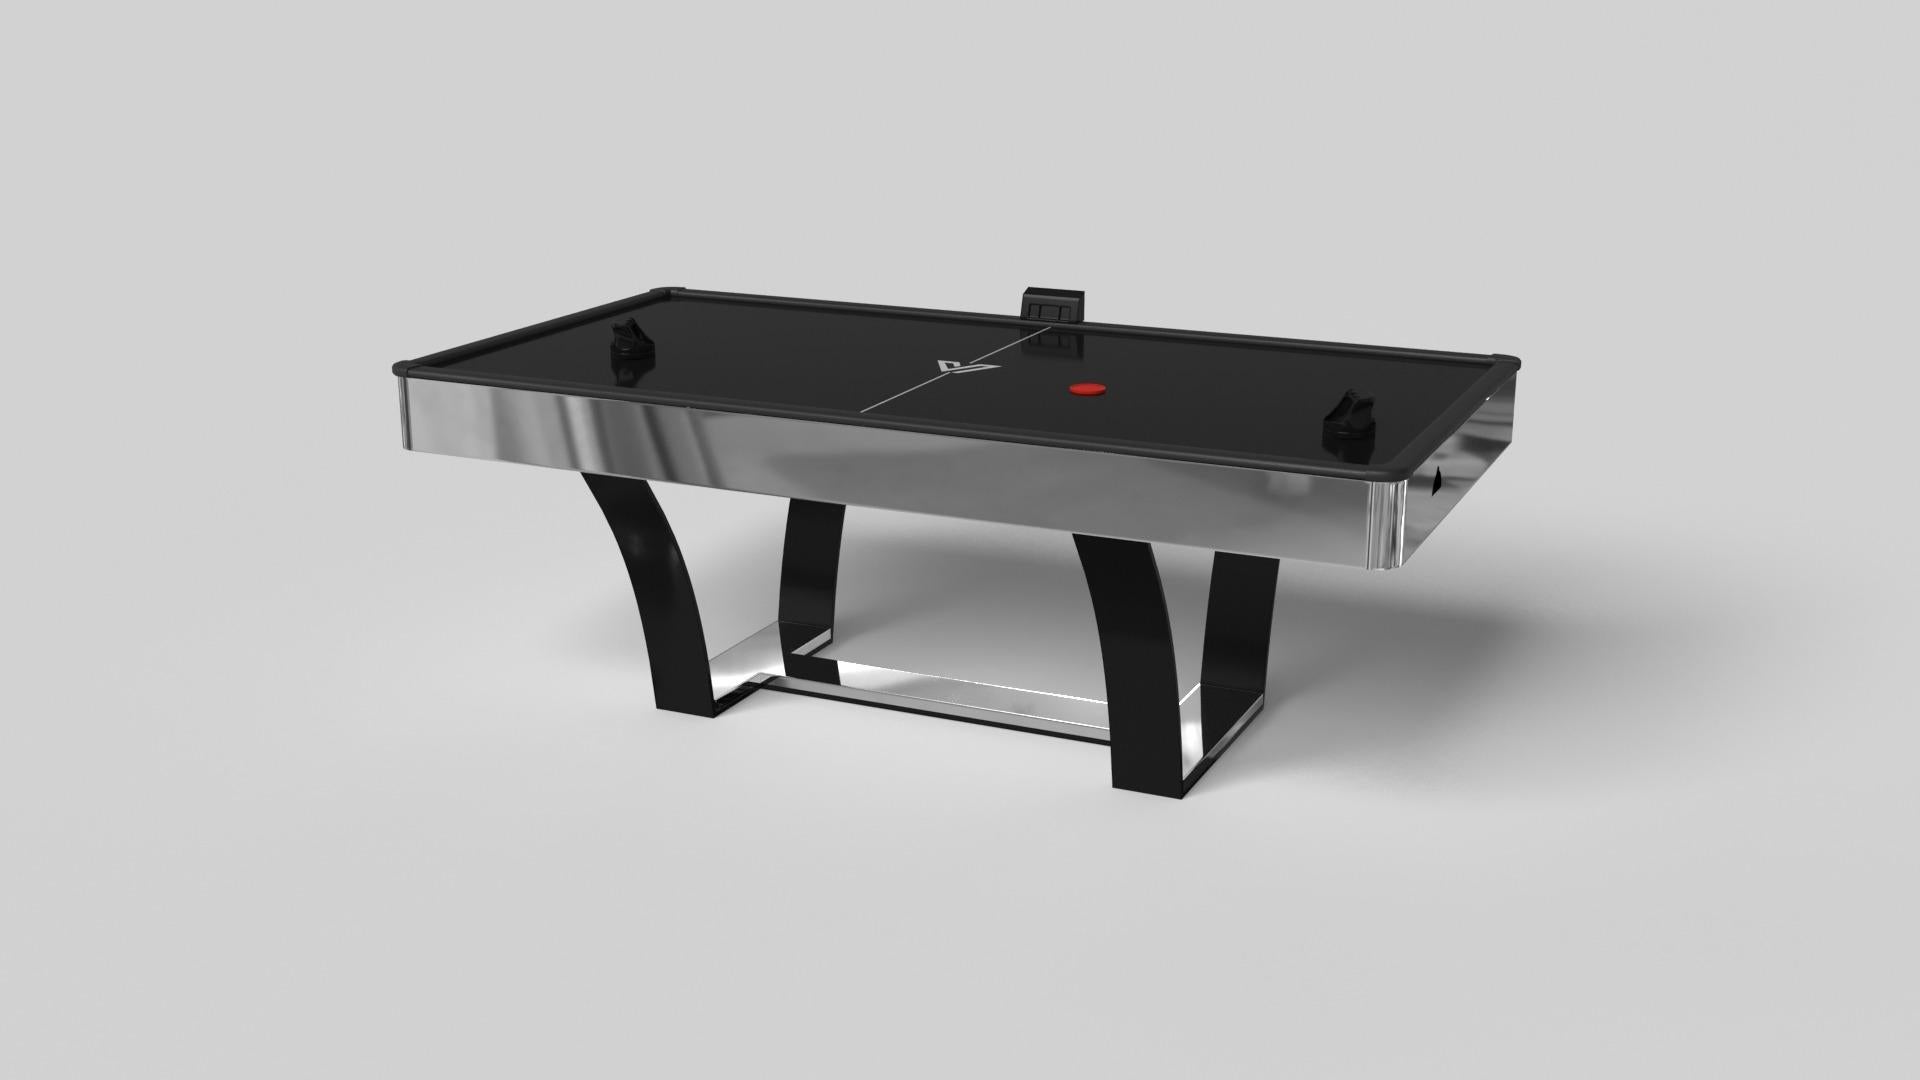 With an I-shaped metal base, slightly sloped metal legs, and a contrasting wood top, the Elite air hockey table exudes modern sophistication while evoking a sense of art deco design. This table is a confluence of style, made to meet today's demands